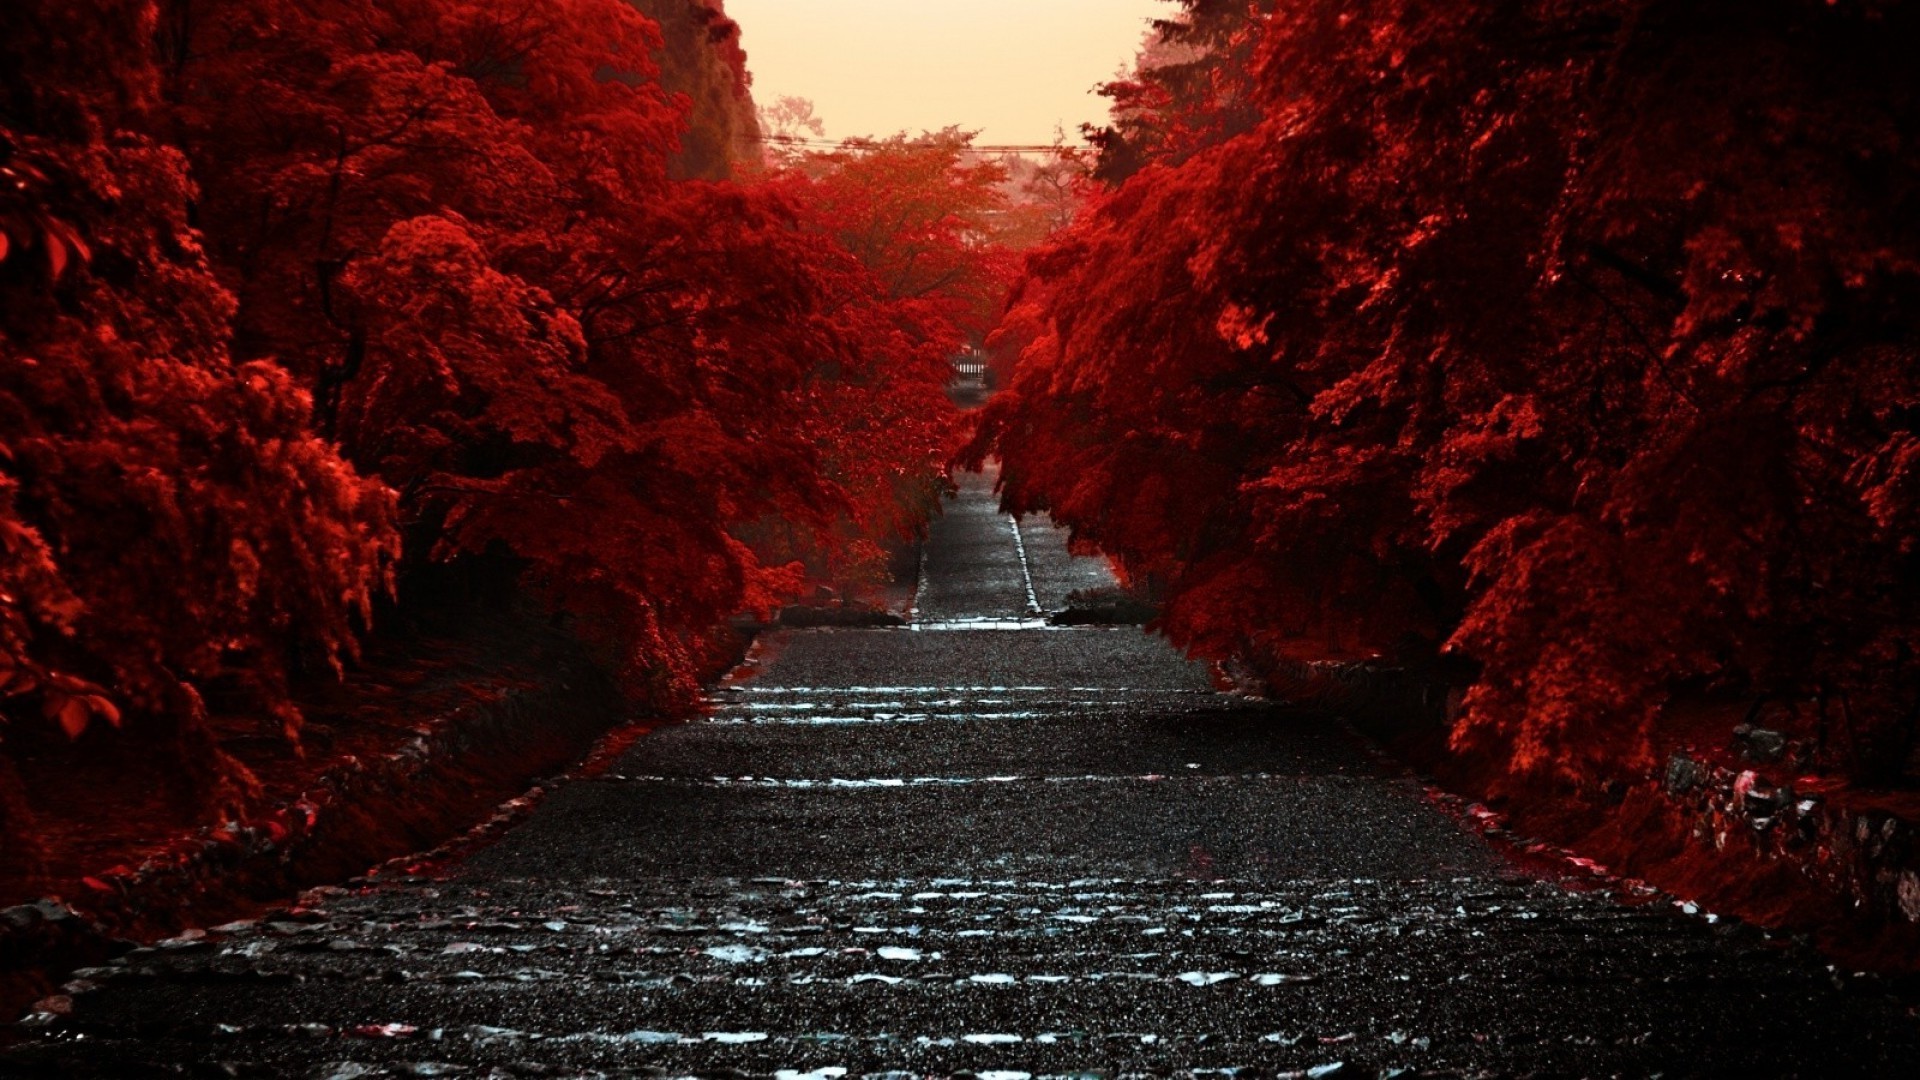 The road along the forest with red foliage